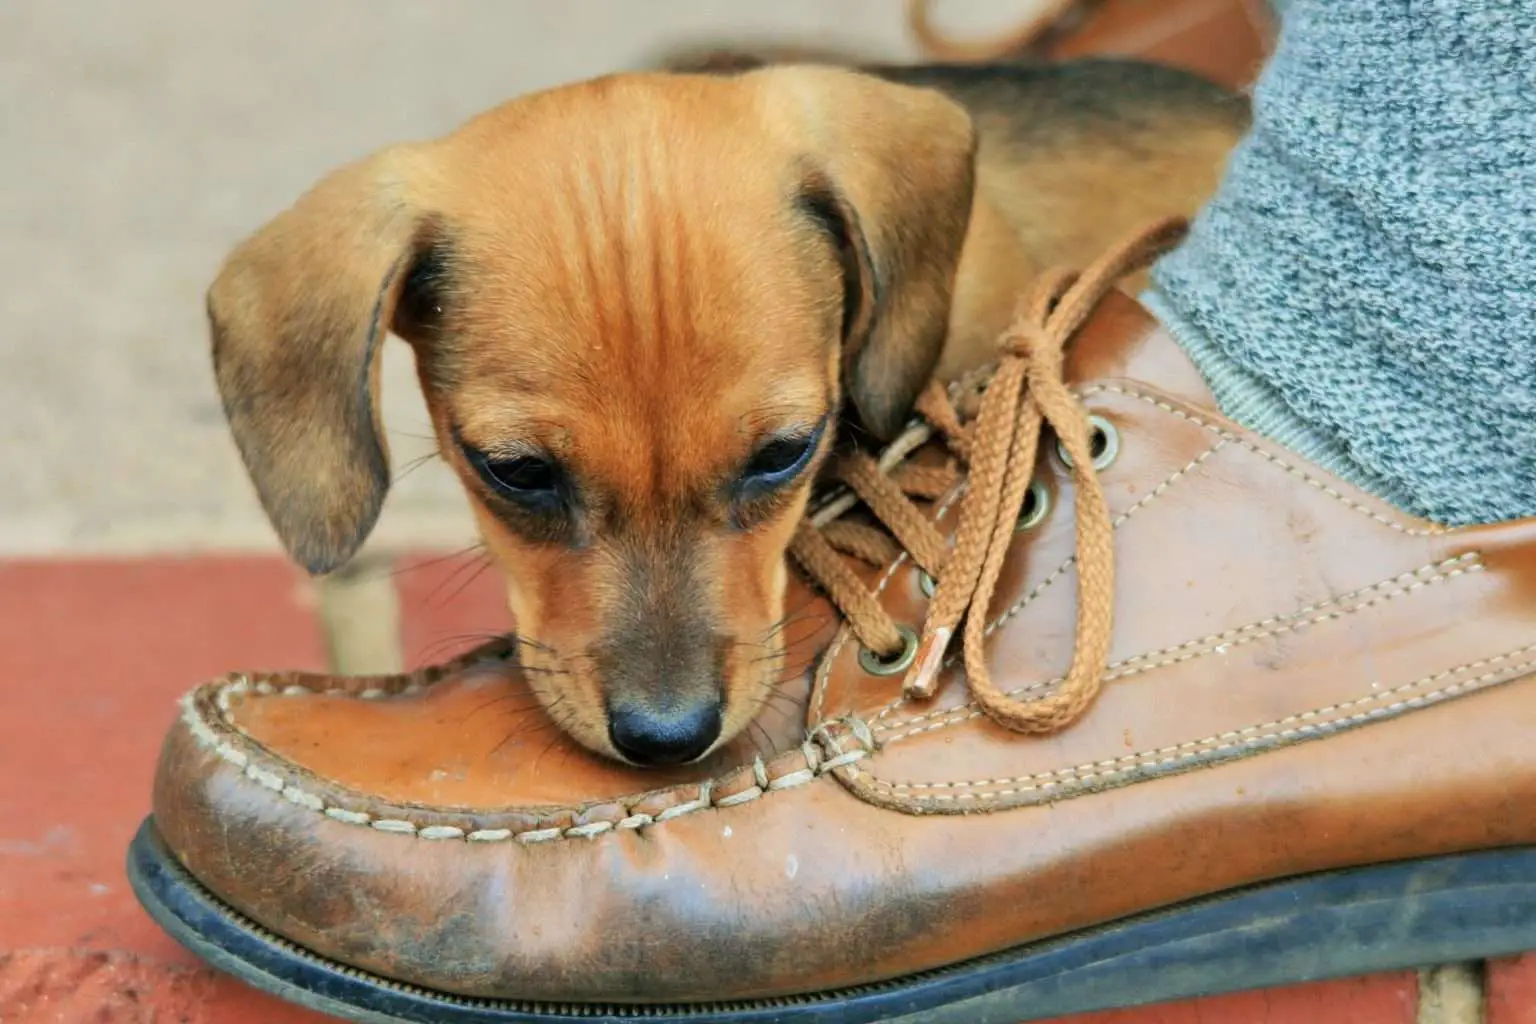 How to Stop Dogs from Chewing Shoes?